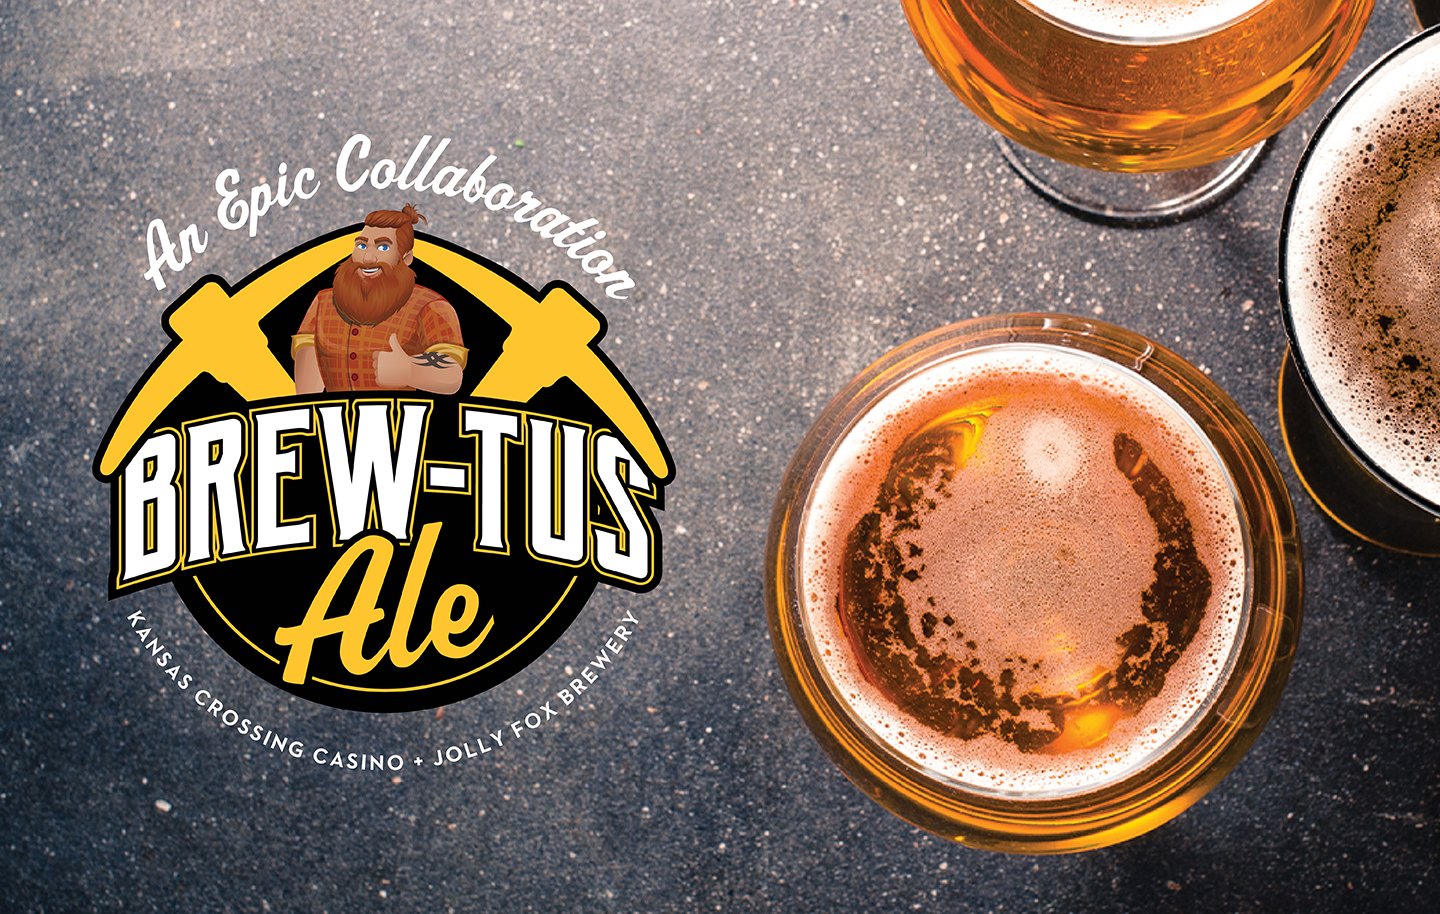 Brew-tus Ale - An epic collaboration with Kansas Crossing Casino + Jolly Fox Brewery